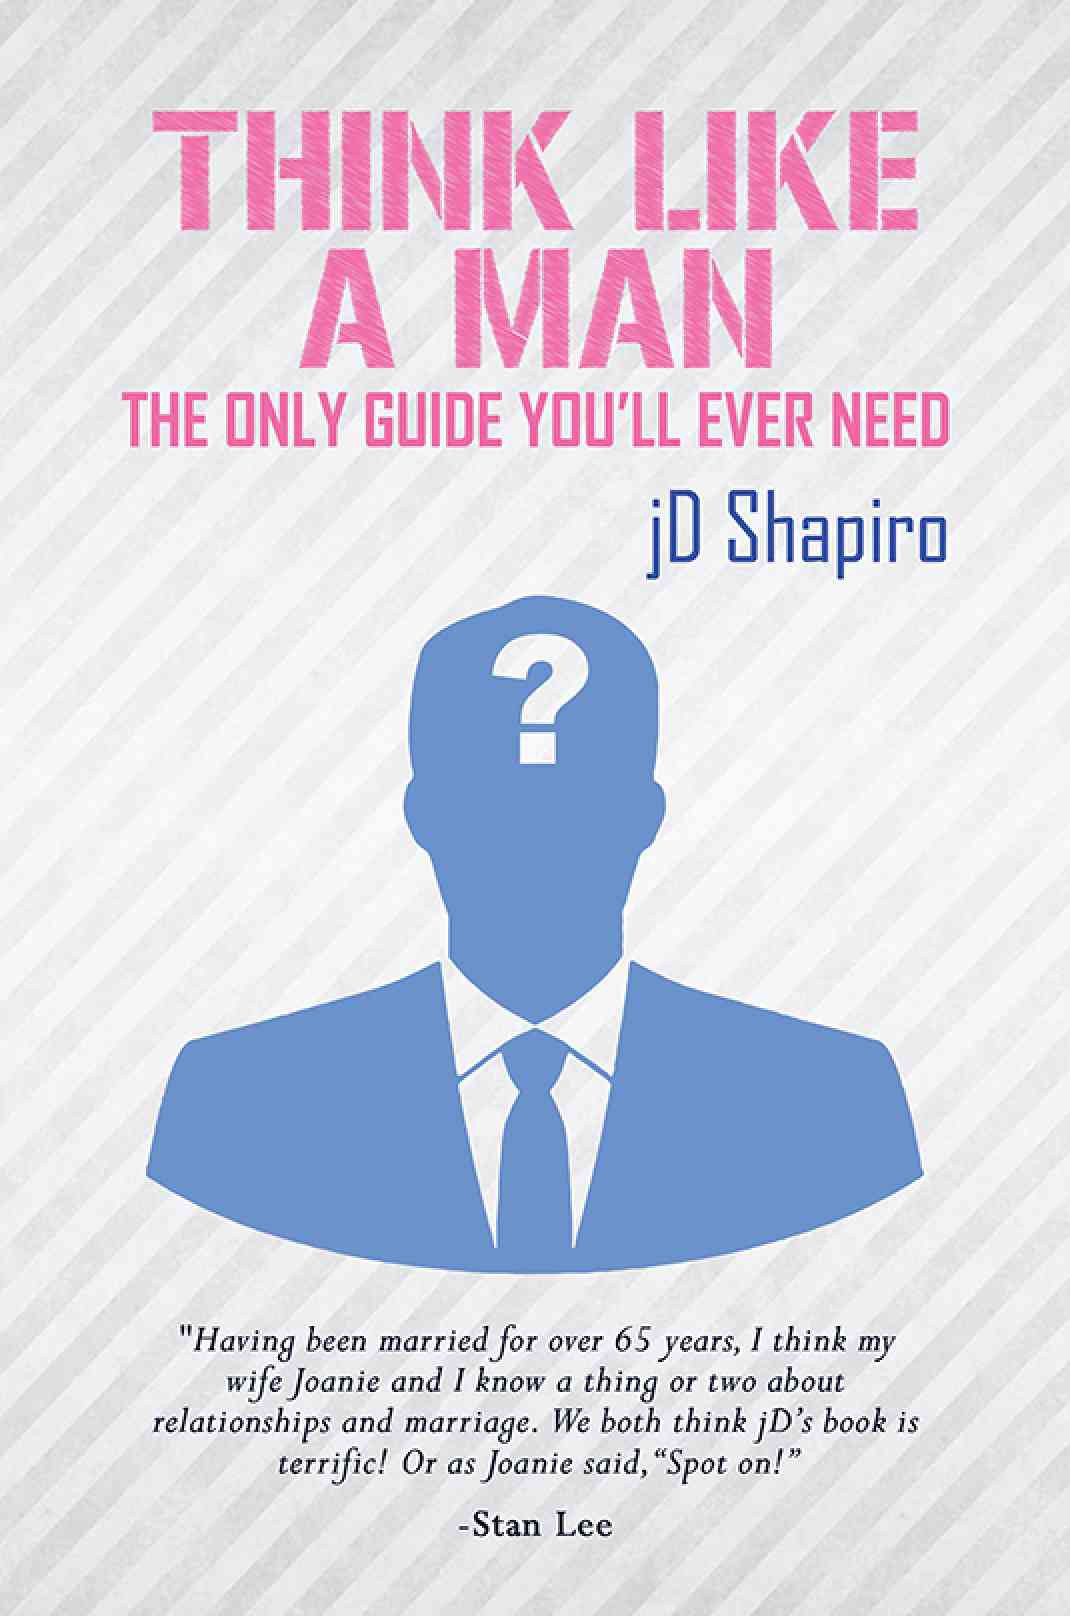 Austin Macauley Publication Think like a Man by jD Shapiro Was Featured on Improve Her Health Website